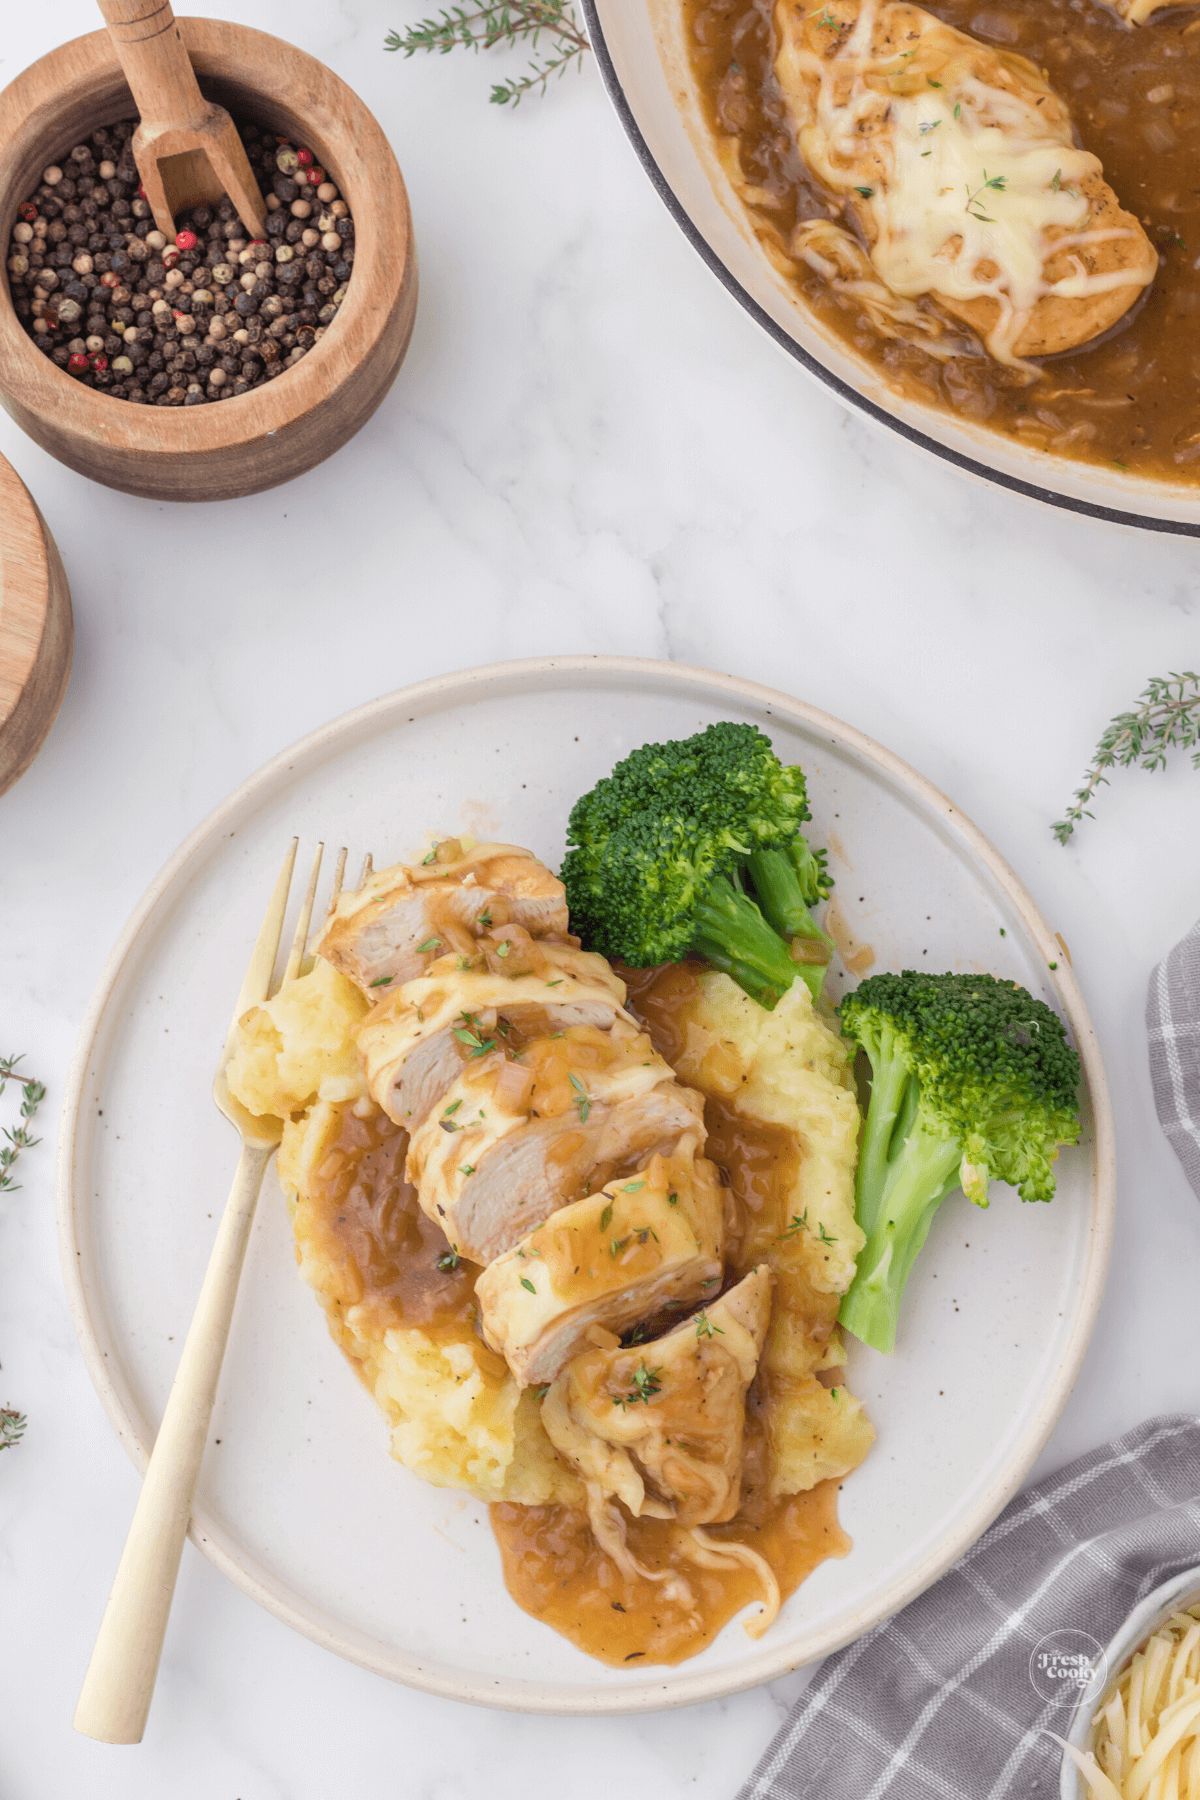 French onion chicken sliced on bed of mashed potatoes and broccoli.